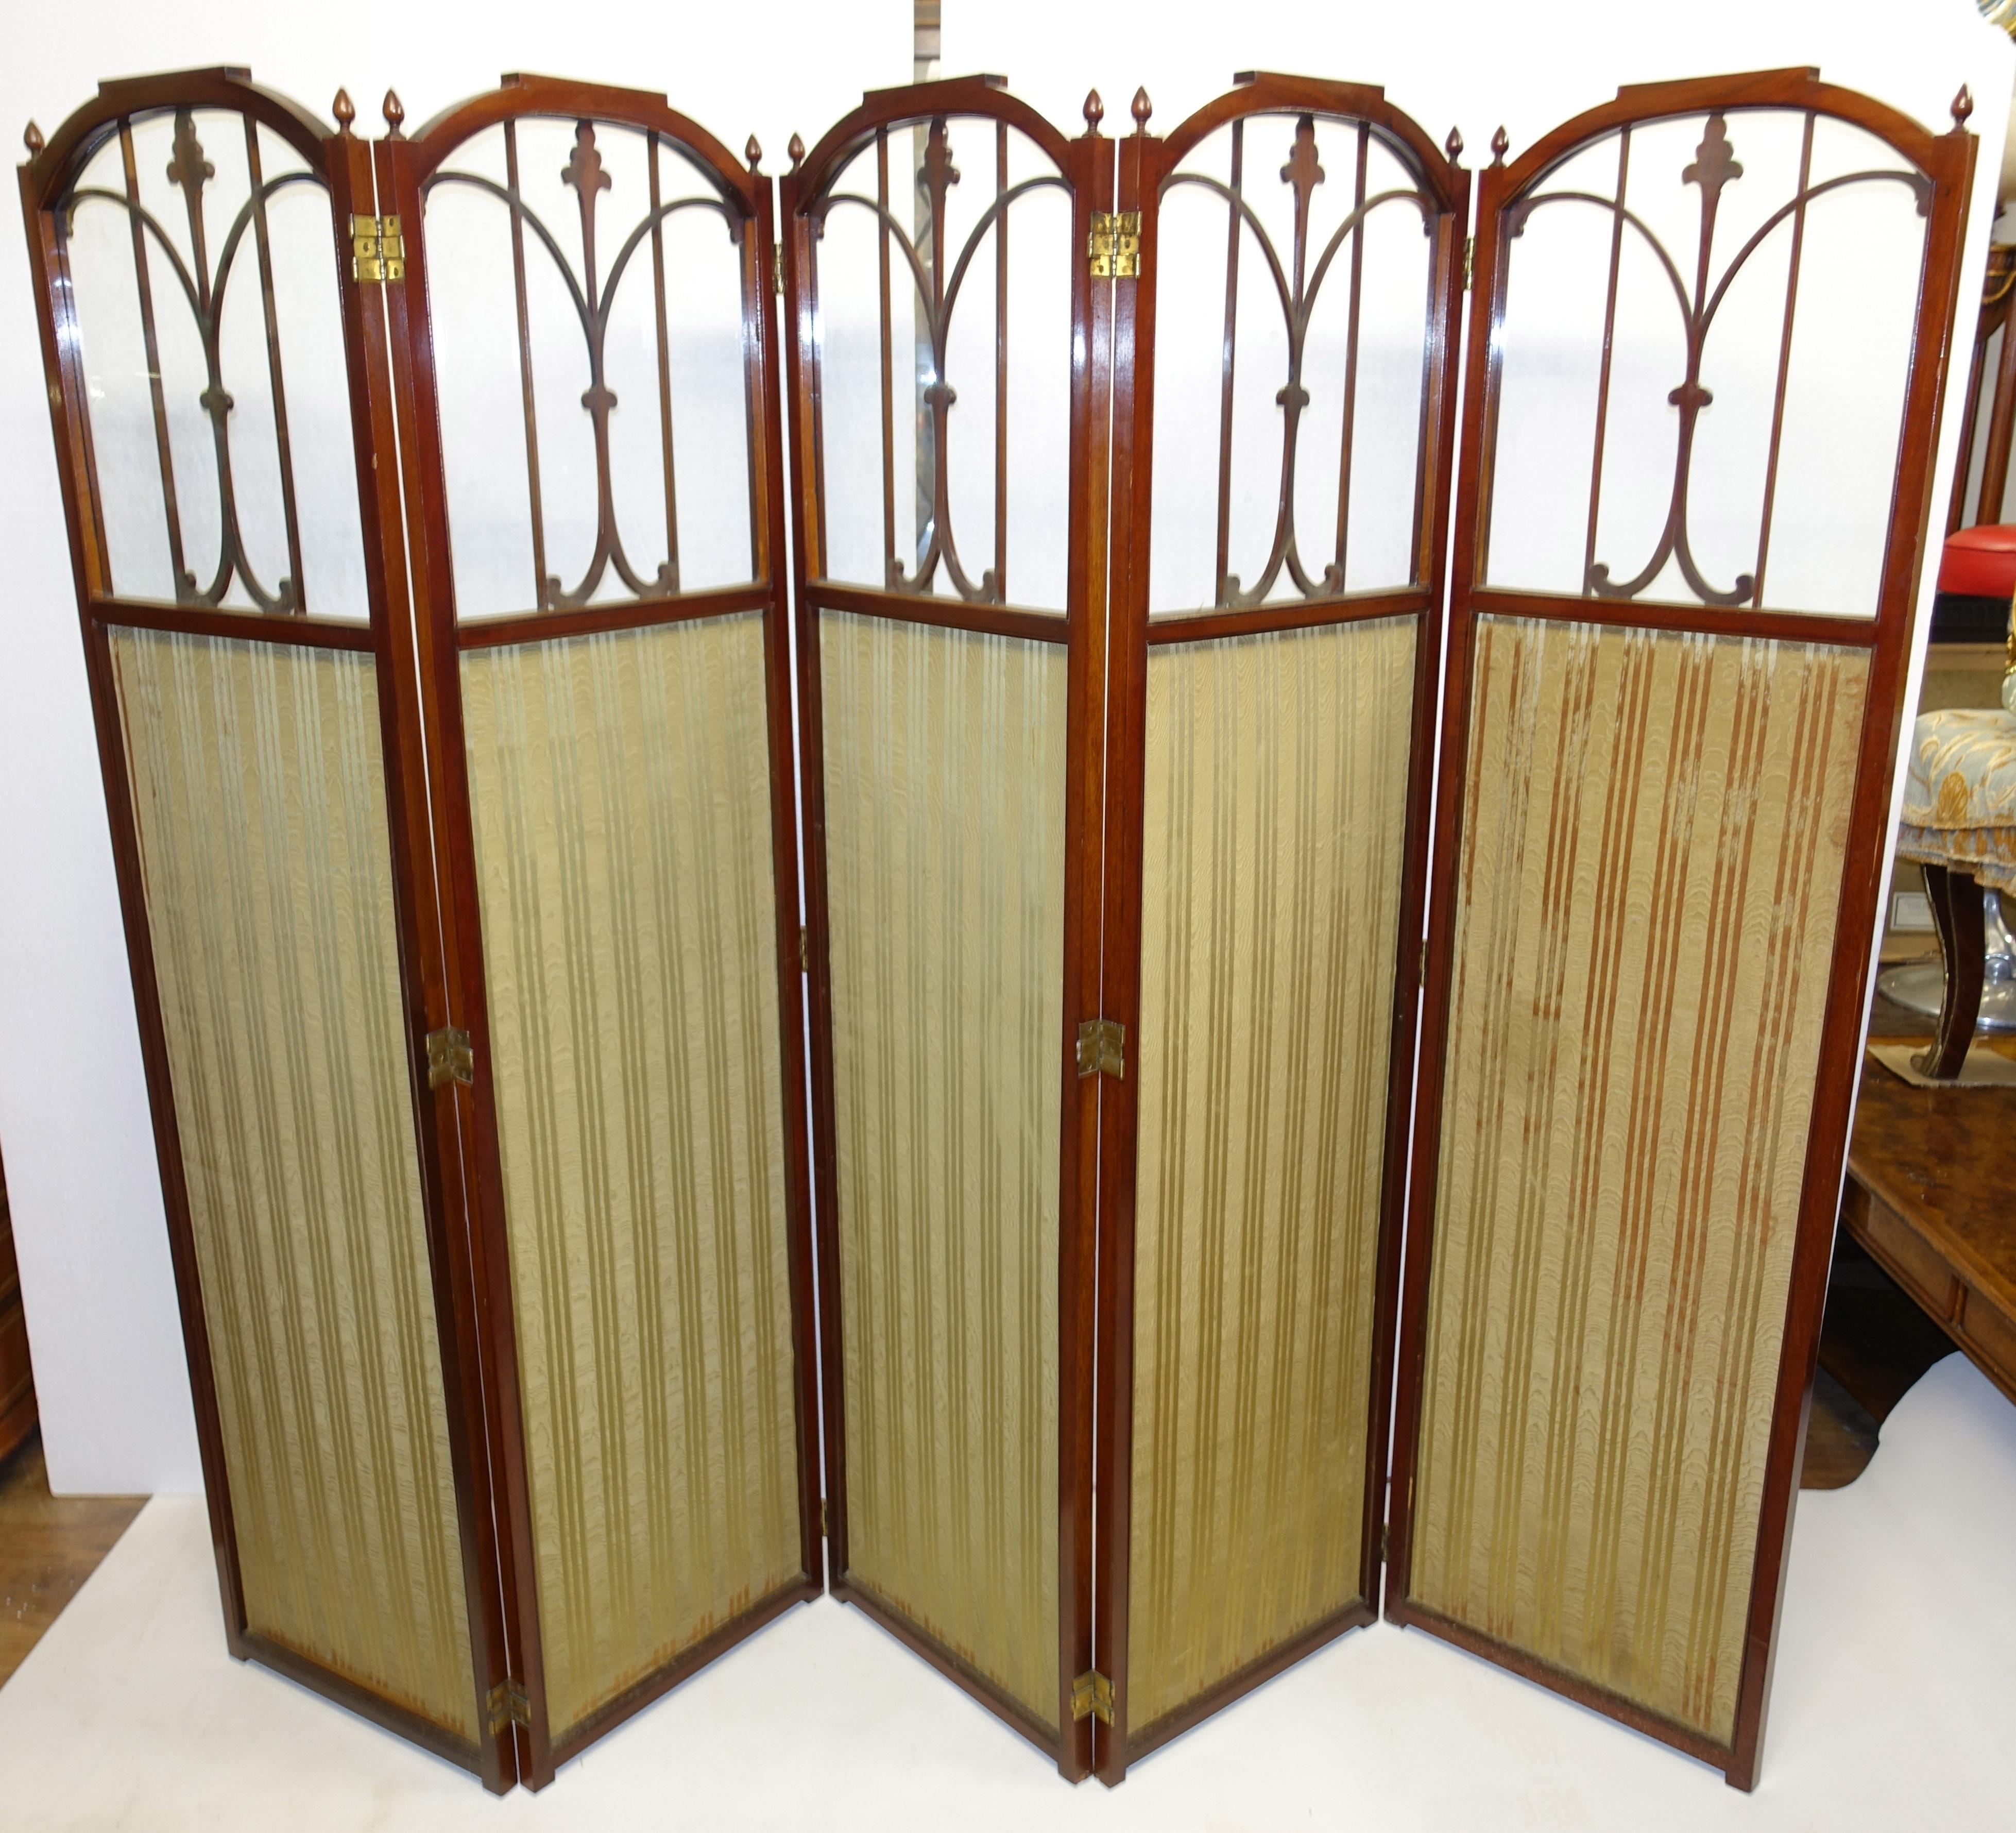 Stunning five part Edwardian screen in satinwood
Great interiors piece and each section the bottom half is finished in patterned fabric
We date this to circa 1910
We bought this from a private house sale in London's Pimlico Offered in great shape